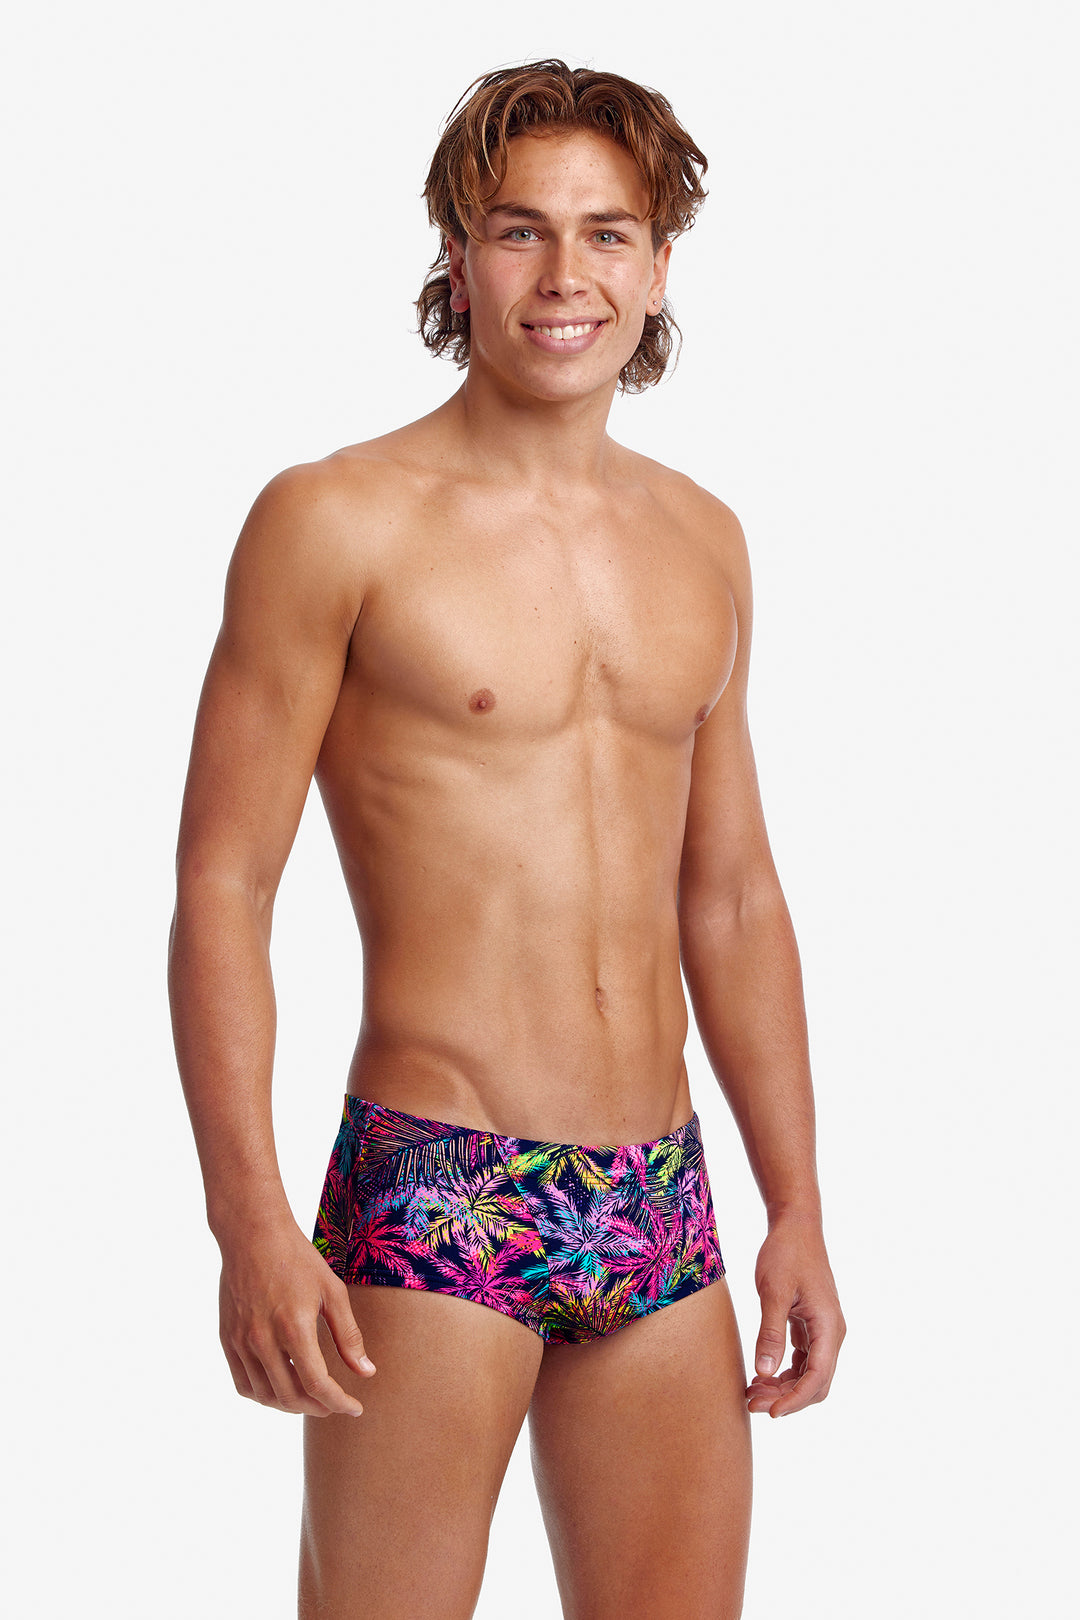 Palm Puppy Classic Trunk Box Swimsuit FT30M - Mens